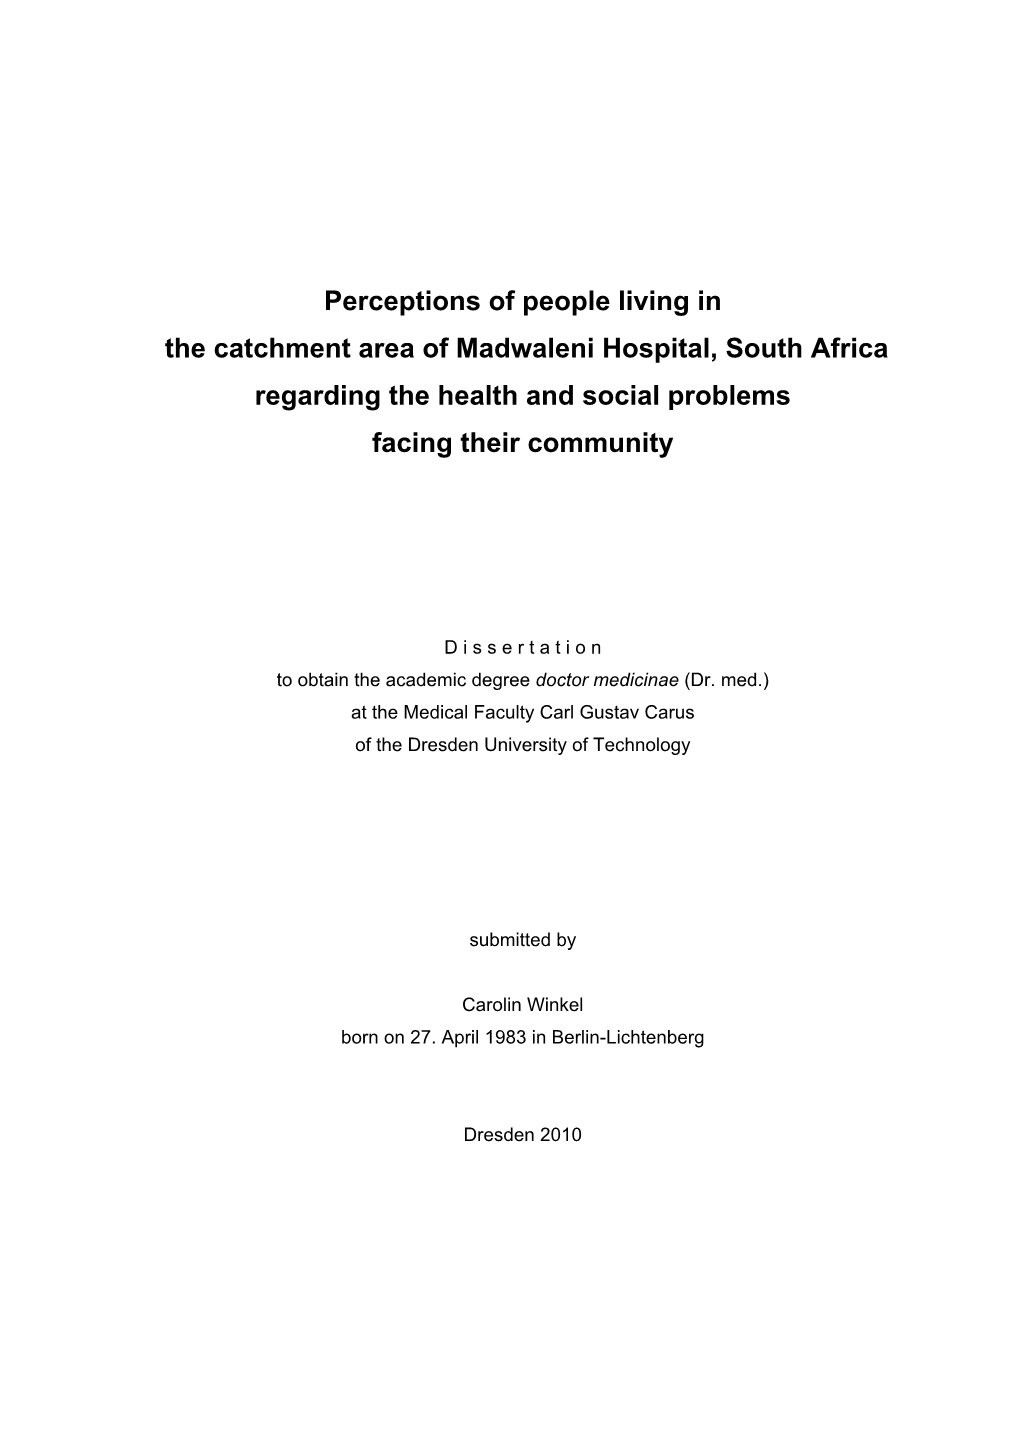 Perceptions of People Living in the Catchment Area of Madwaleni Hospital, South Africa Regarding the Health and Social Problems Facing Their Community